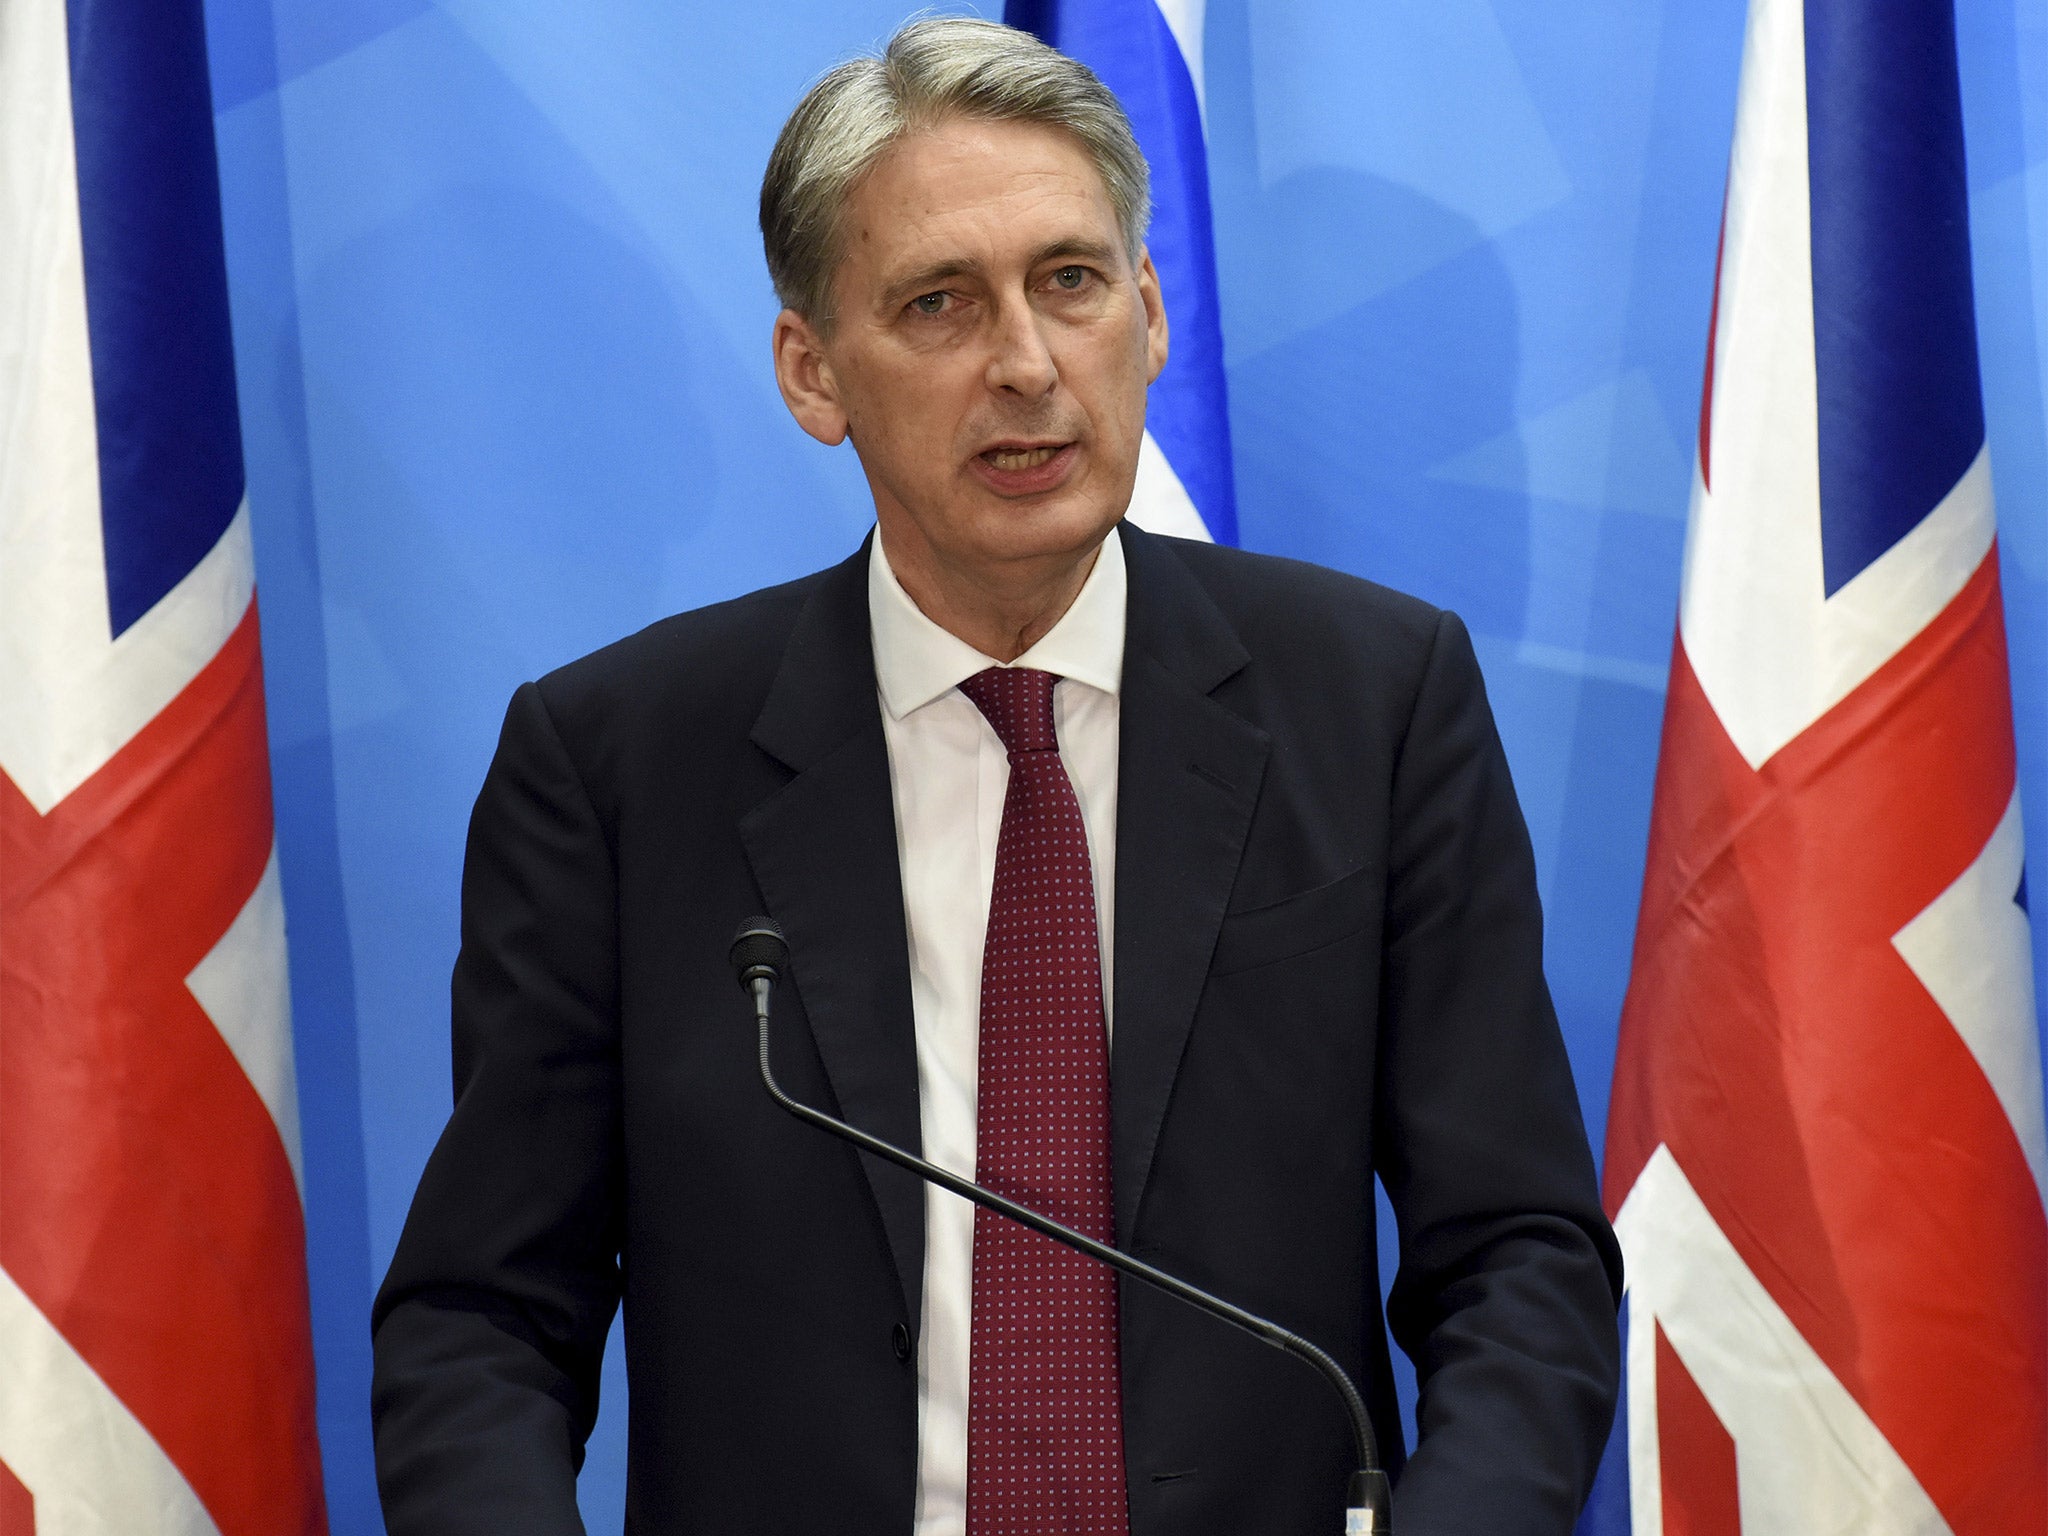 Philip Hammond, Foreign Secretary: 'There is a simple efficiency logic about being able to conduct operations across both theatres'